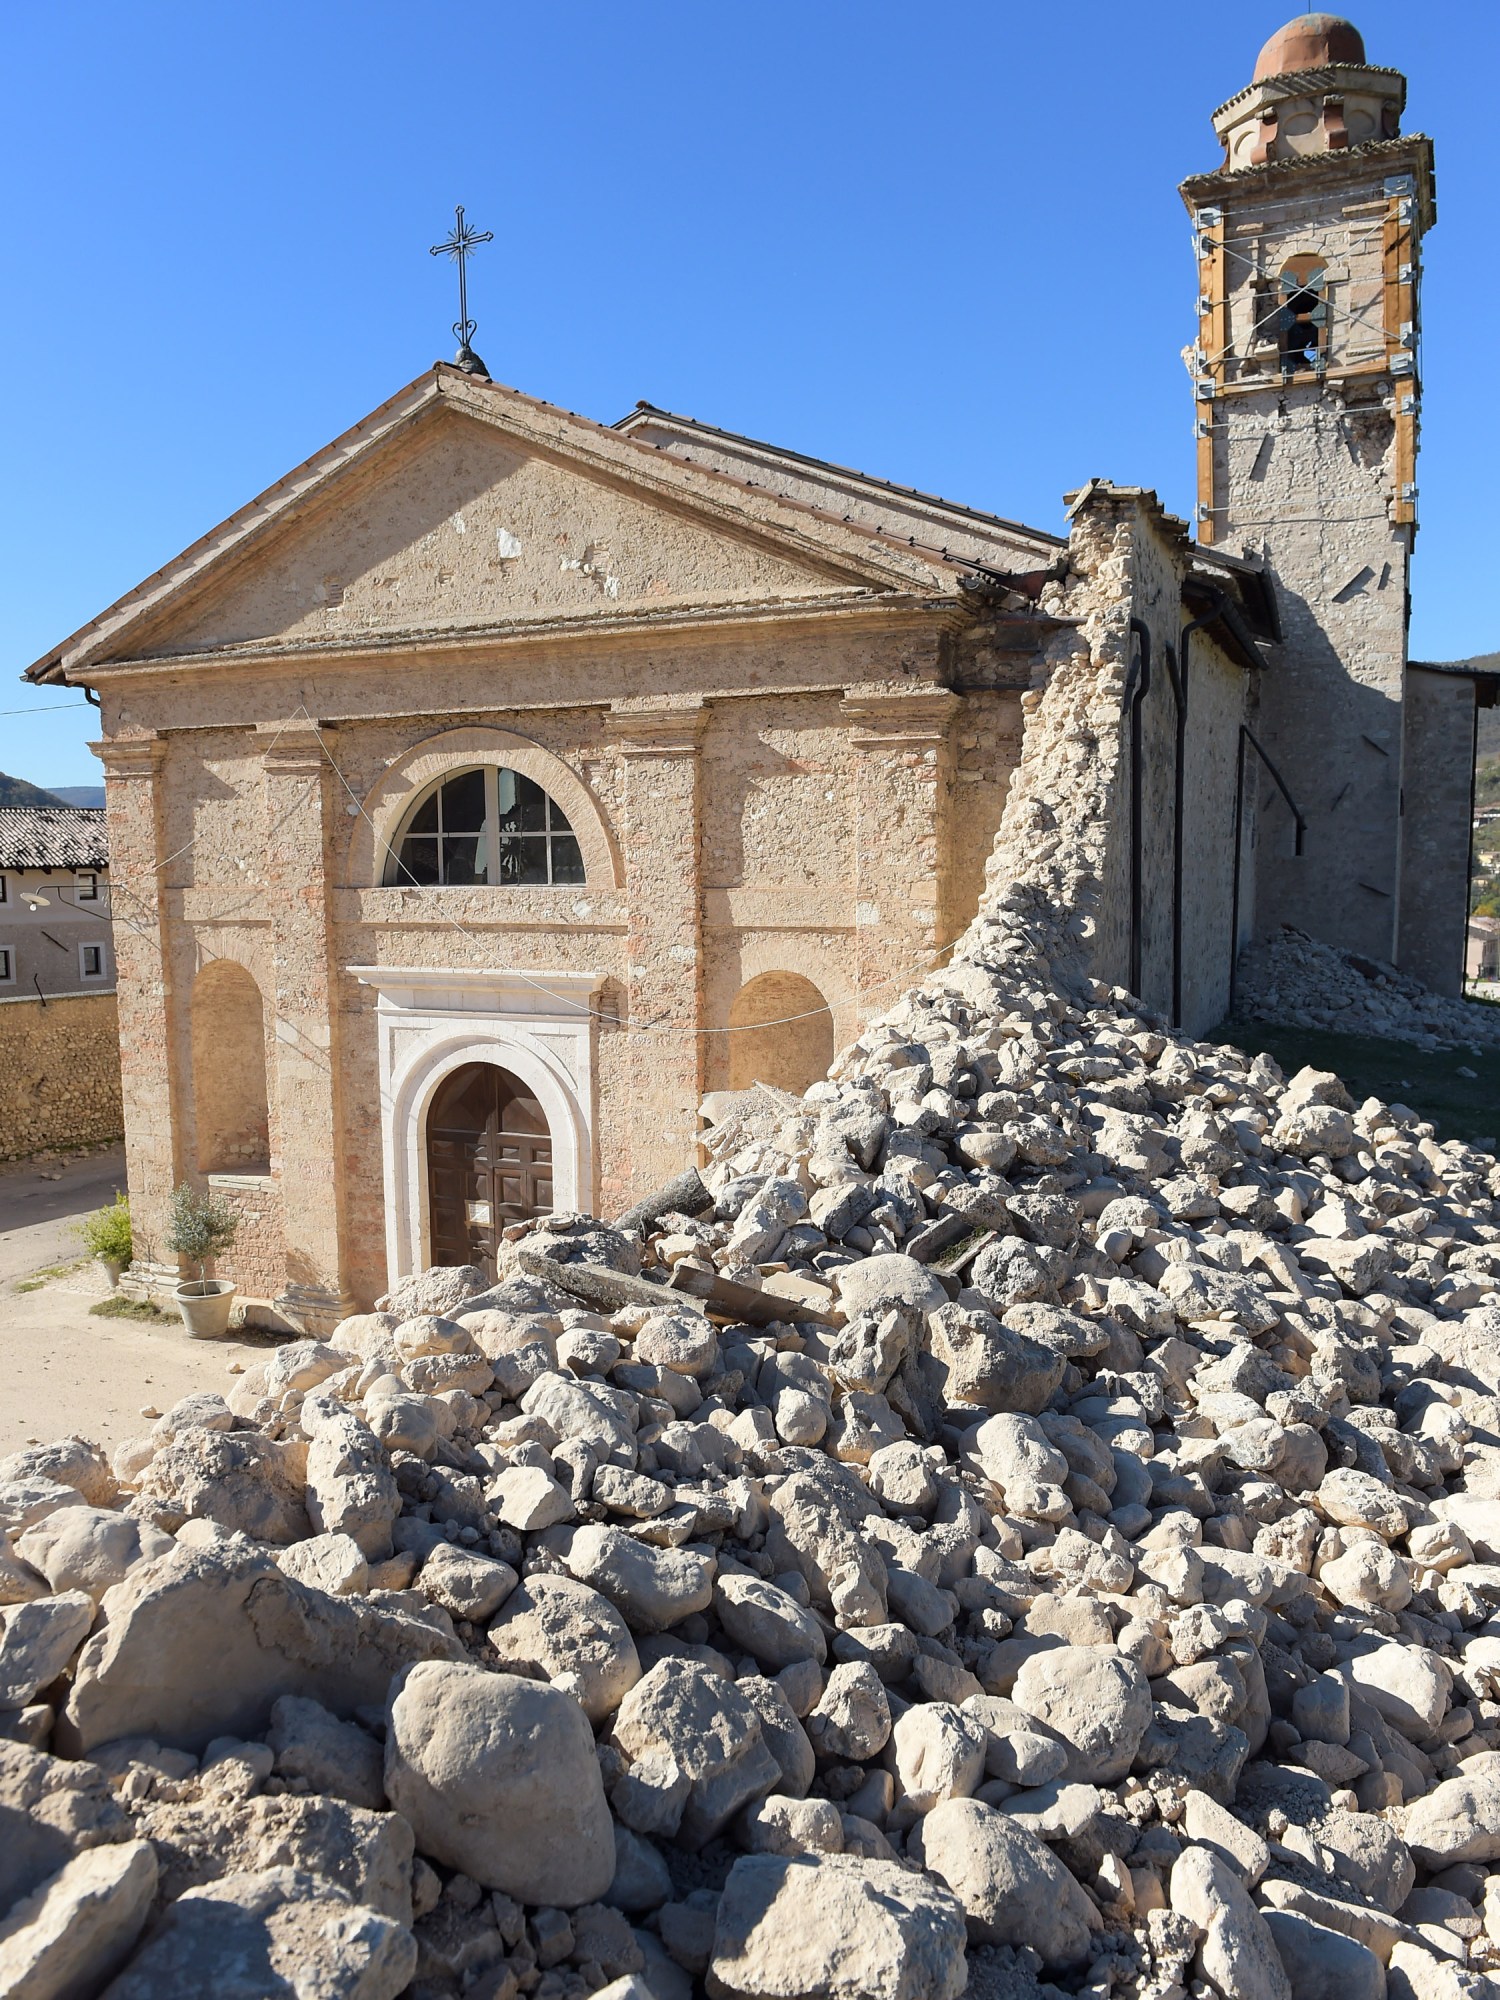 an old church seen standing past a massive pile of rubble in the foreground